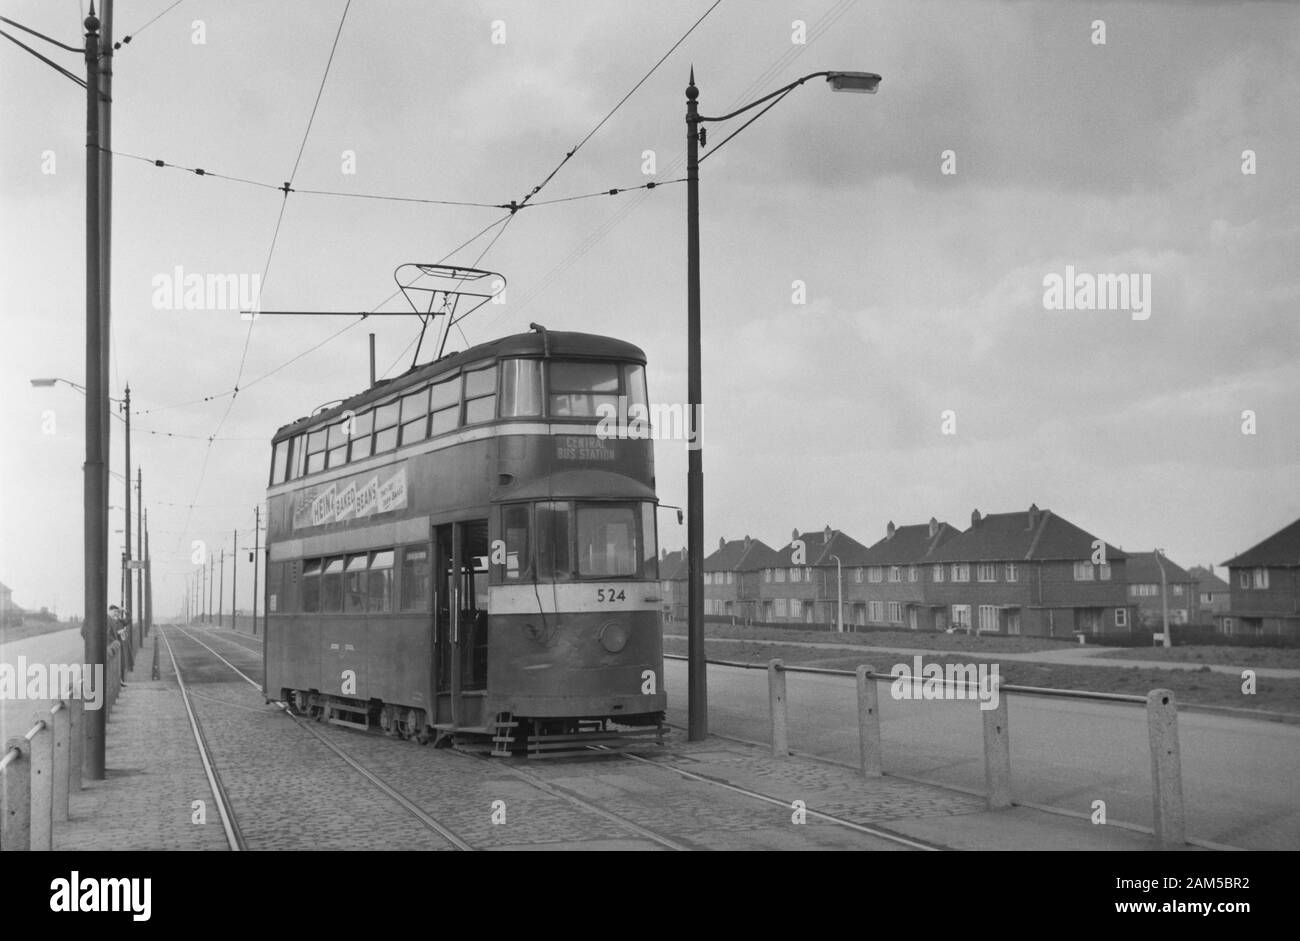 Leeds (Feltham) tram no. 524 changing tracks and on route to the Central Bus Station. Image taken in 1959 before the decommissioning of the Tramway network. Stock Photo